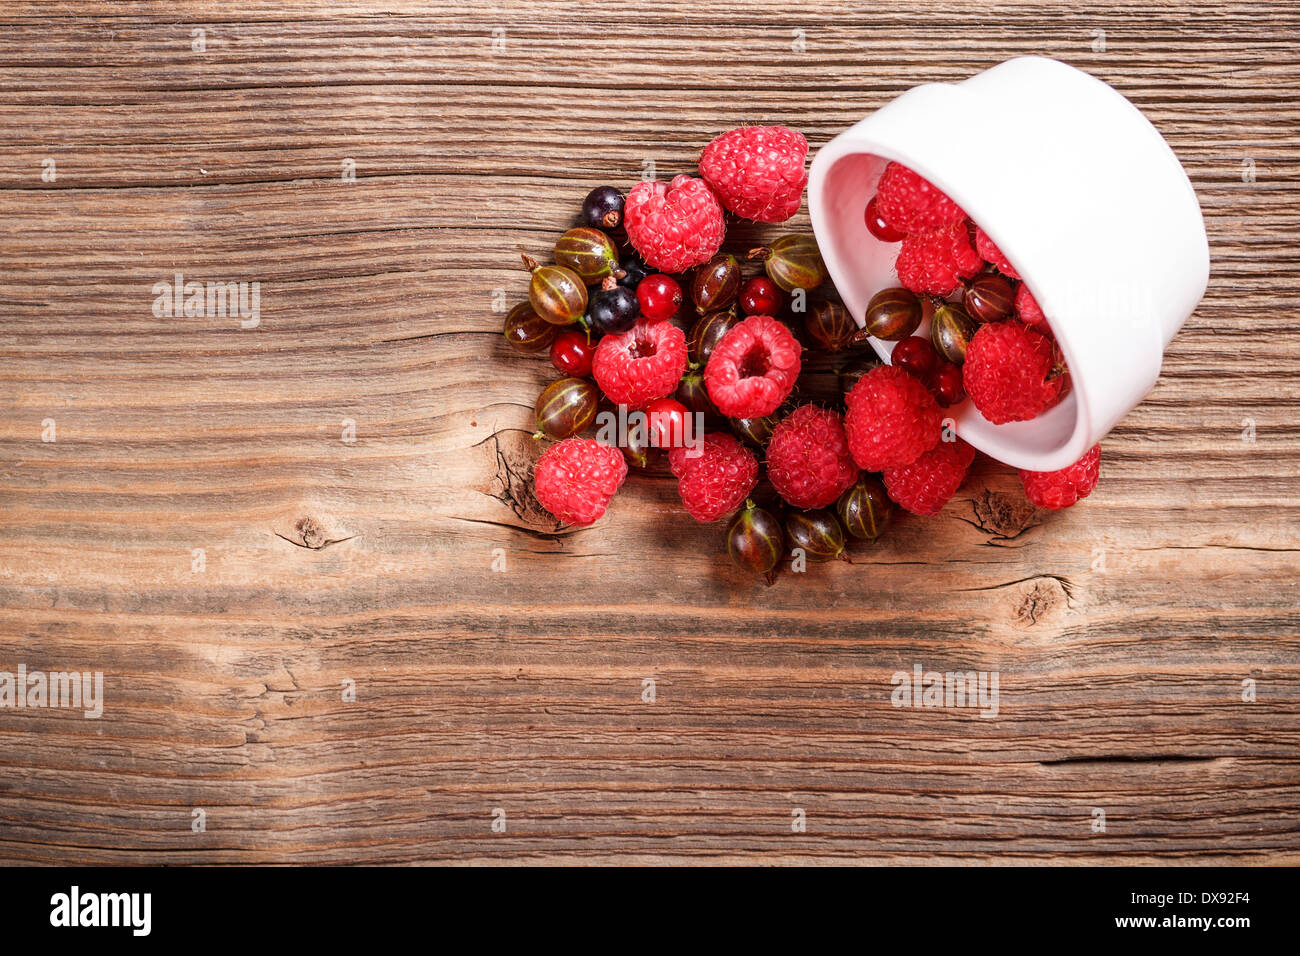 Mixed berries scattered on old wooden board Stock Photo